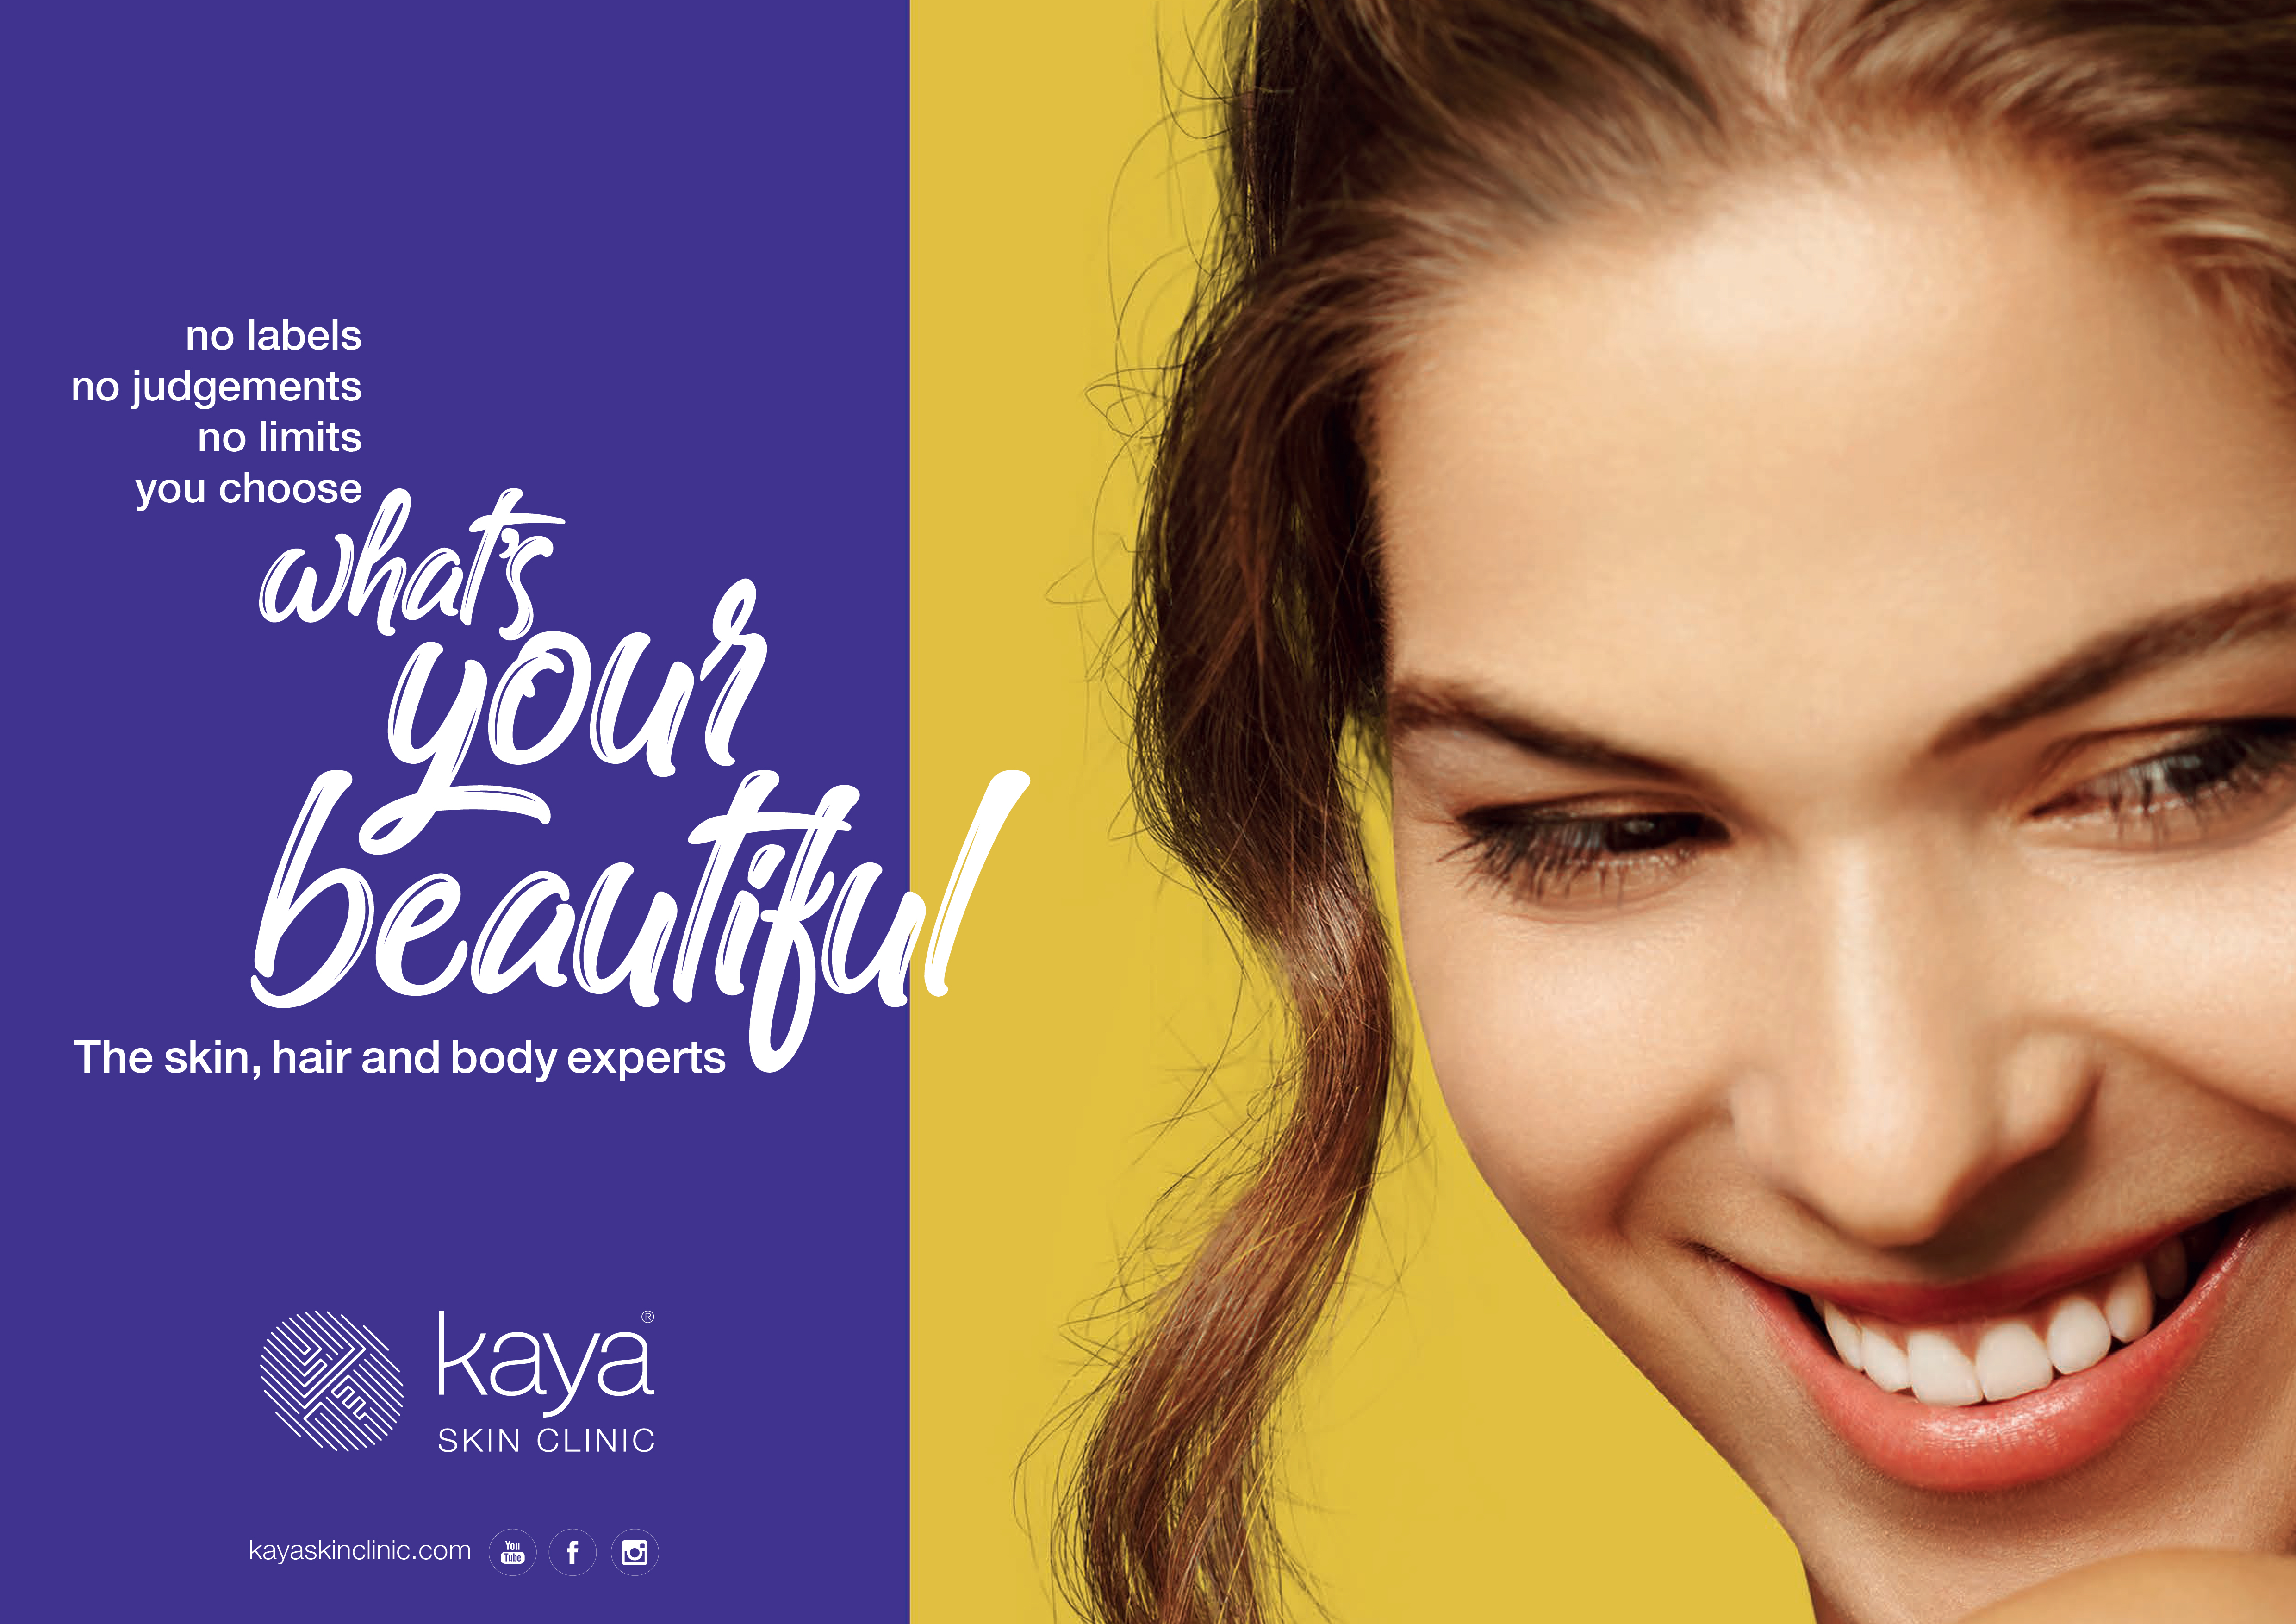 Momentum creates campaign 'What's Your Beautiful?' for Kaya Skin Clinic ME  - Campaign Middle East